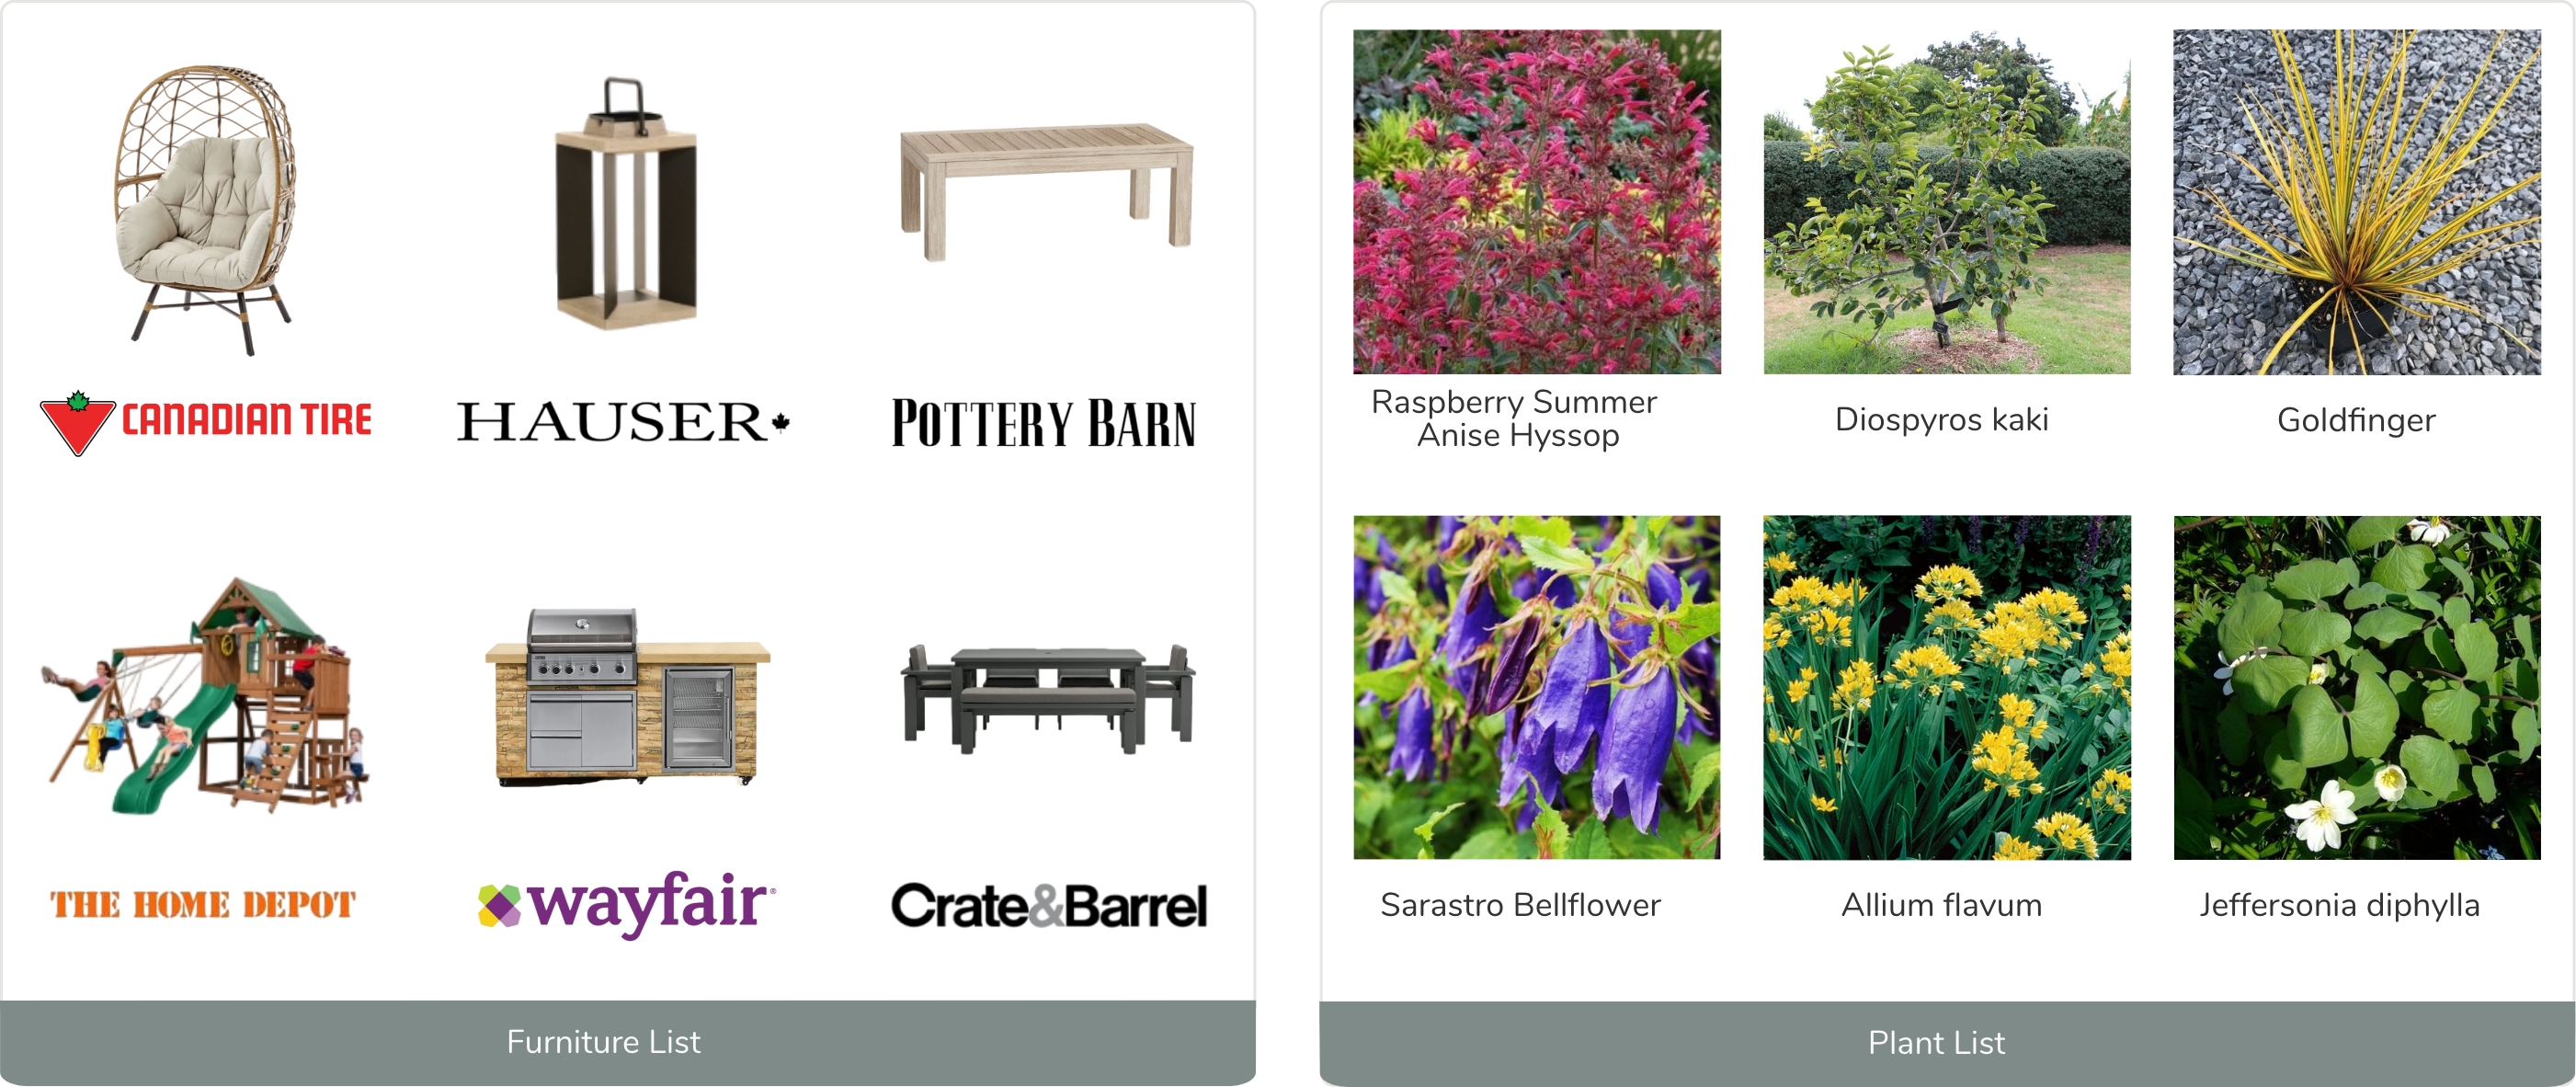 Design catalogue showcasing outdoor furniture and plant varieties selected for client projects